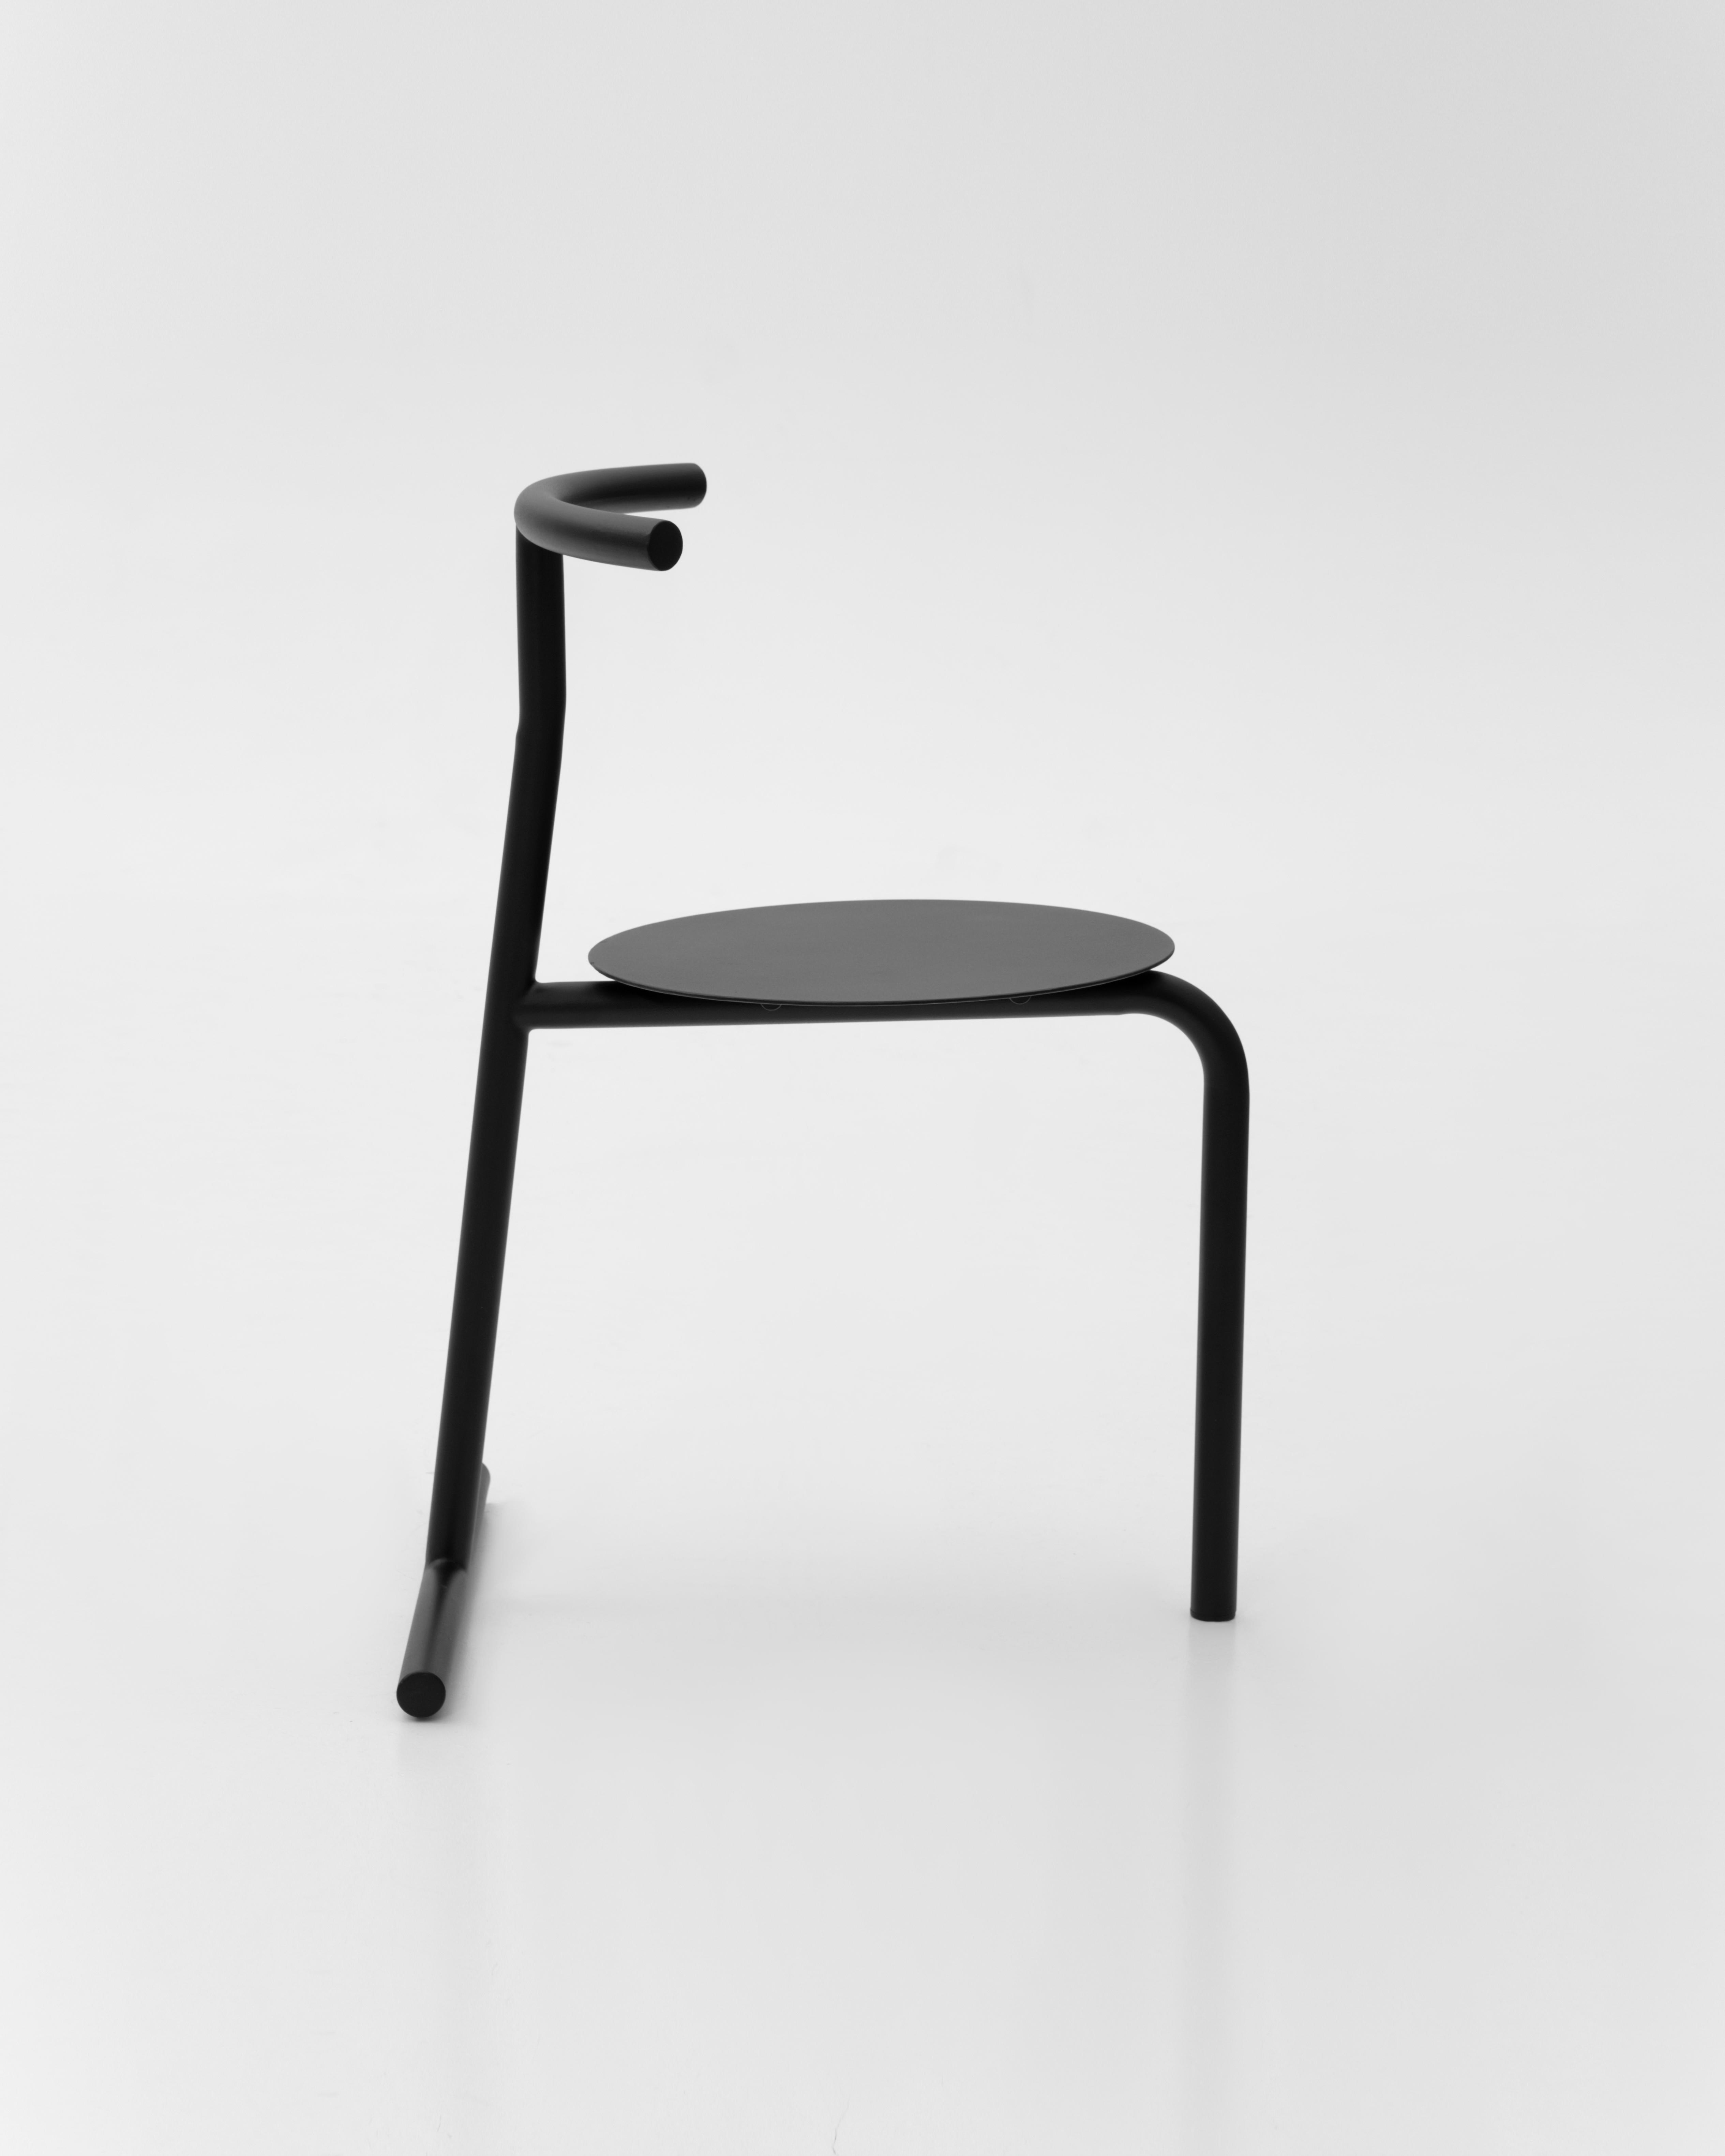 Eater steel seat by Oito
Dimensions: D 50 x W 58 x H 78 cm
Materials: powder coated steel
Weight: 6 kg
Also available in different base color: black, white, blue
 
We've always wanted to create a chair with two legs. After long experiments